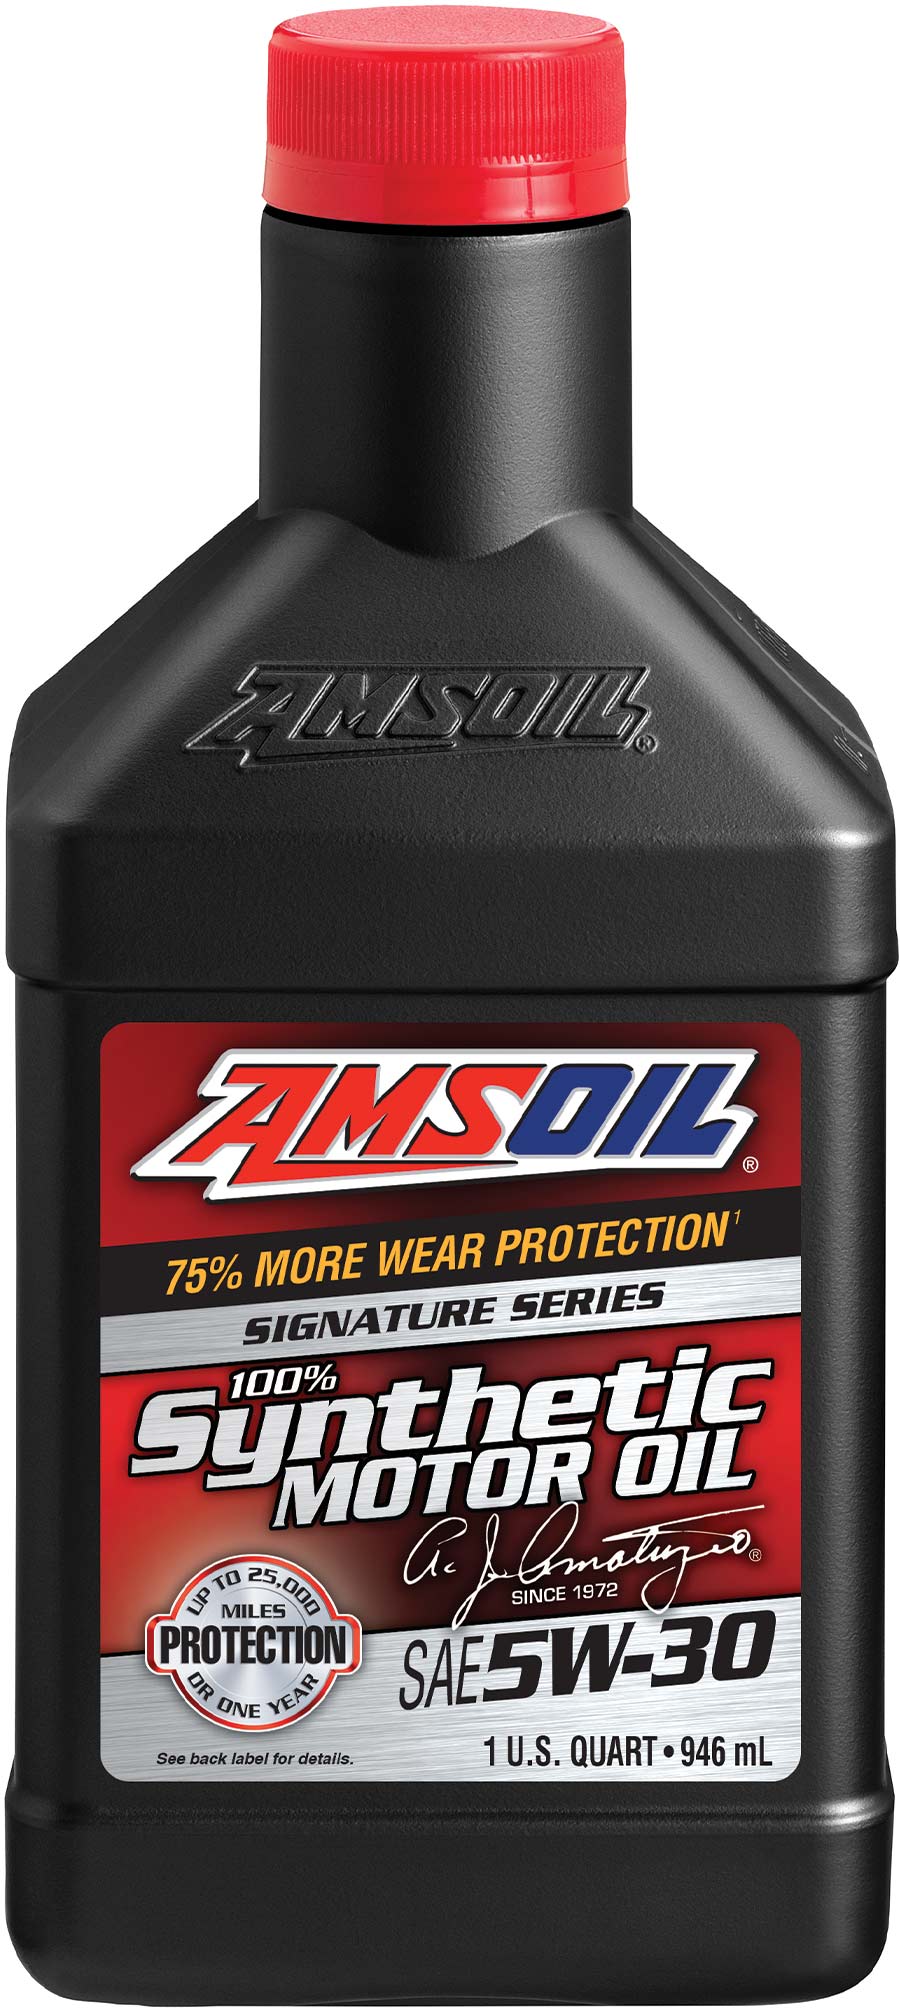 The AMSOIL Signature series is for extended drain intervals. It provides 75 percent more engine protection against horsepower loss and wear and 50 percent more cleaning power versus AMSOIL OE Motor Oil.